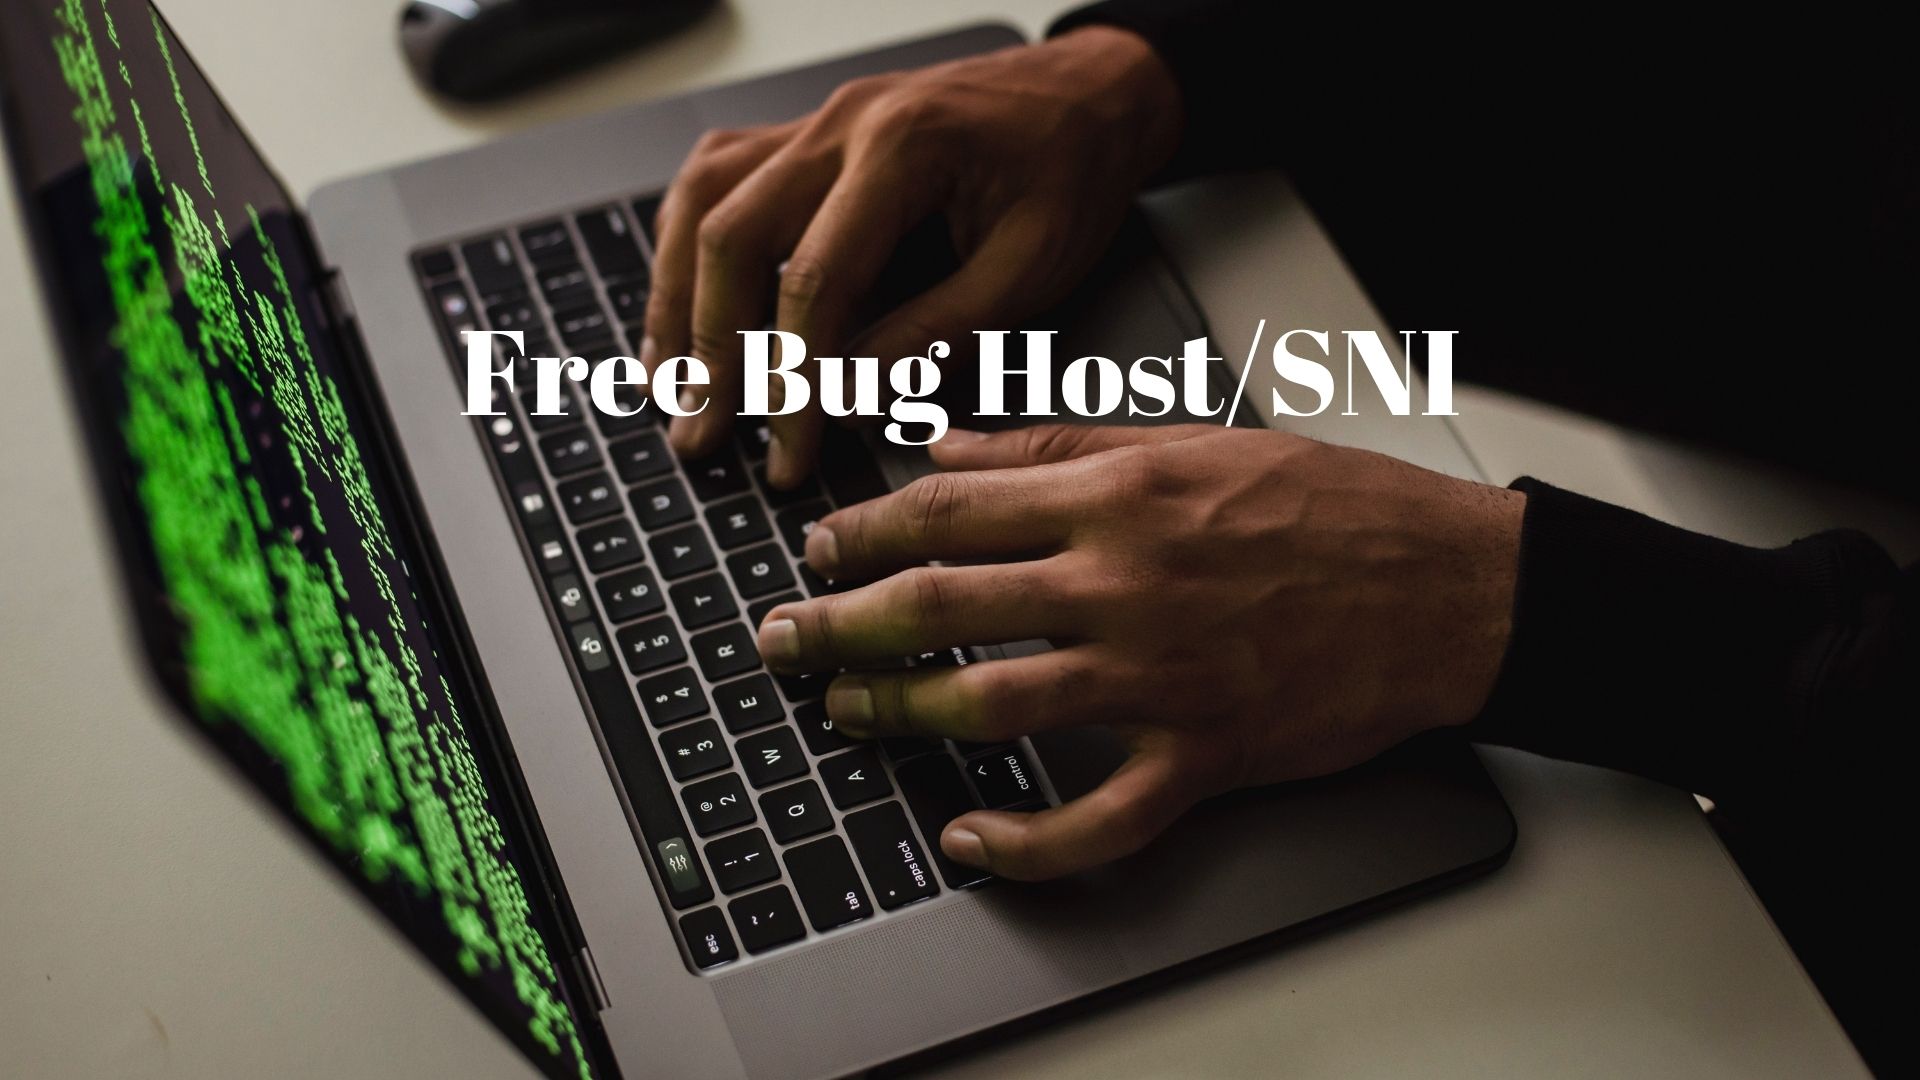 How To  Get Free Bug Host/SNI For Free Unlimited Internet Access On Any Network